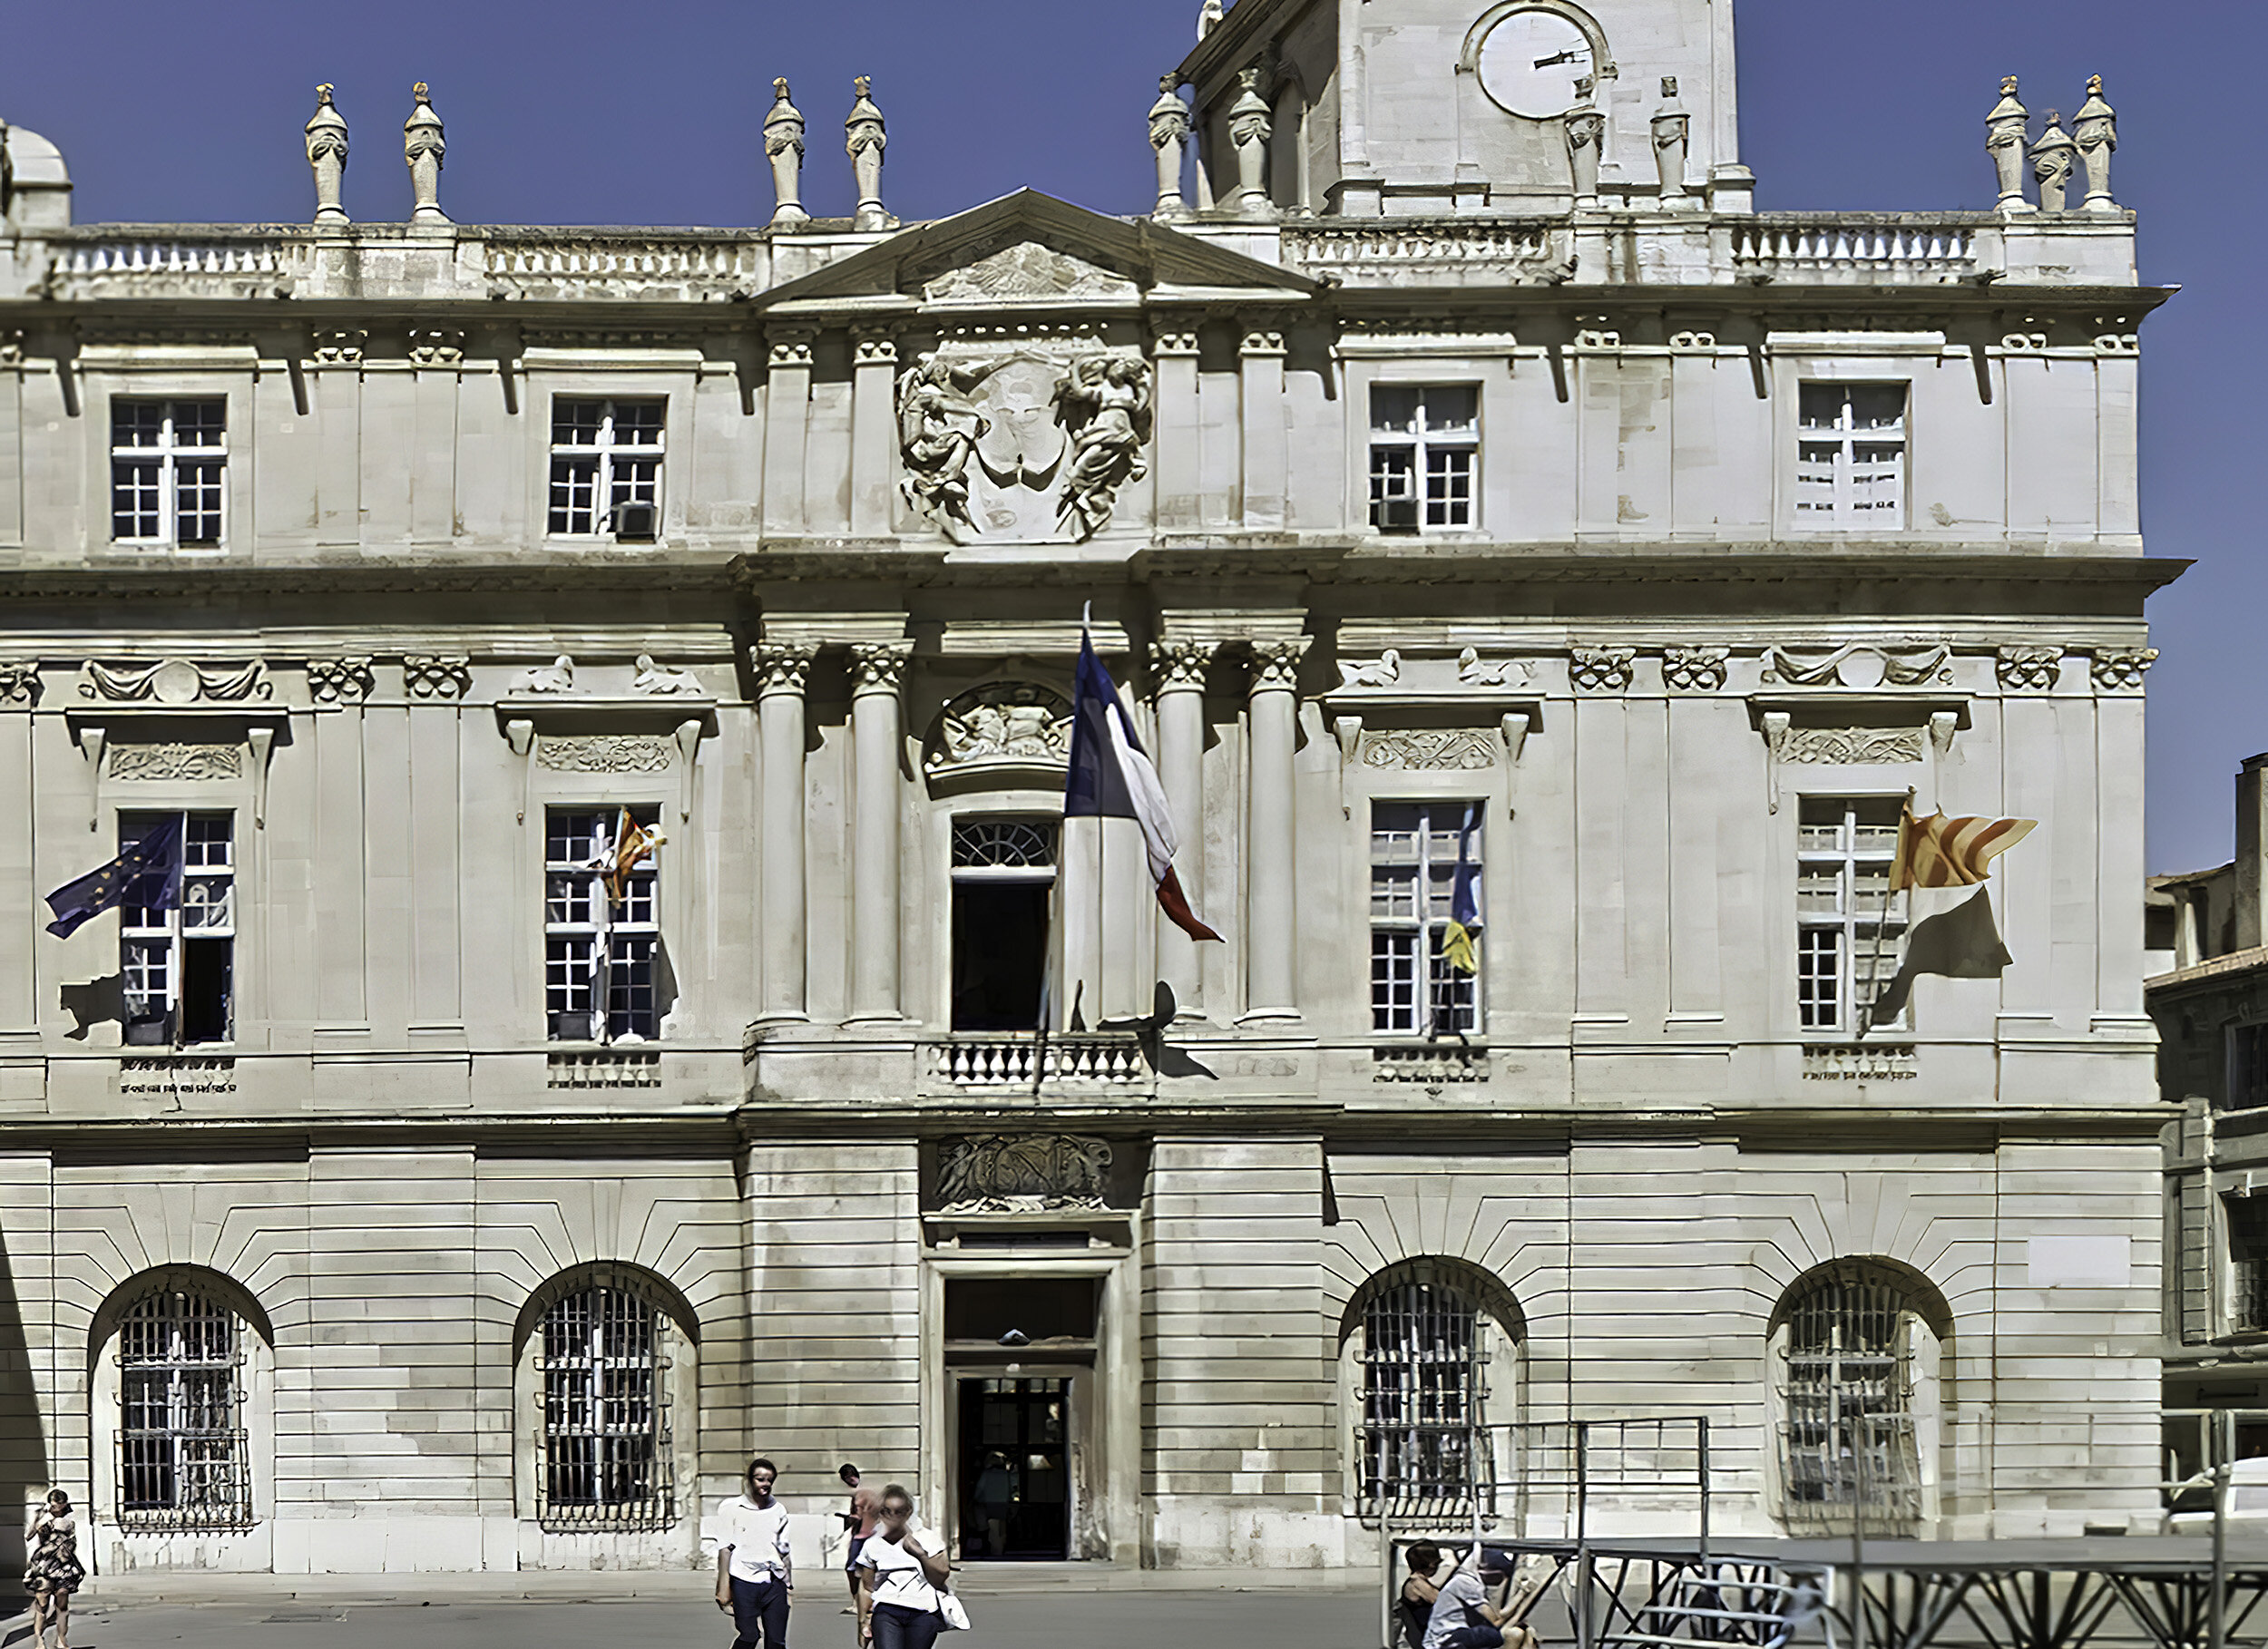 Arles Hotel de Ville today (from Google Earth)